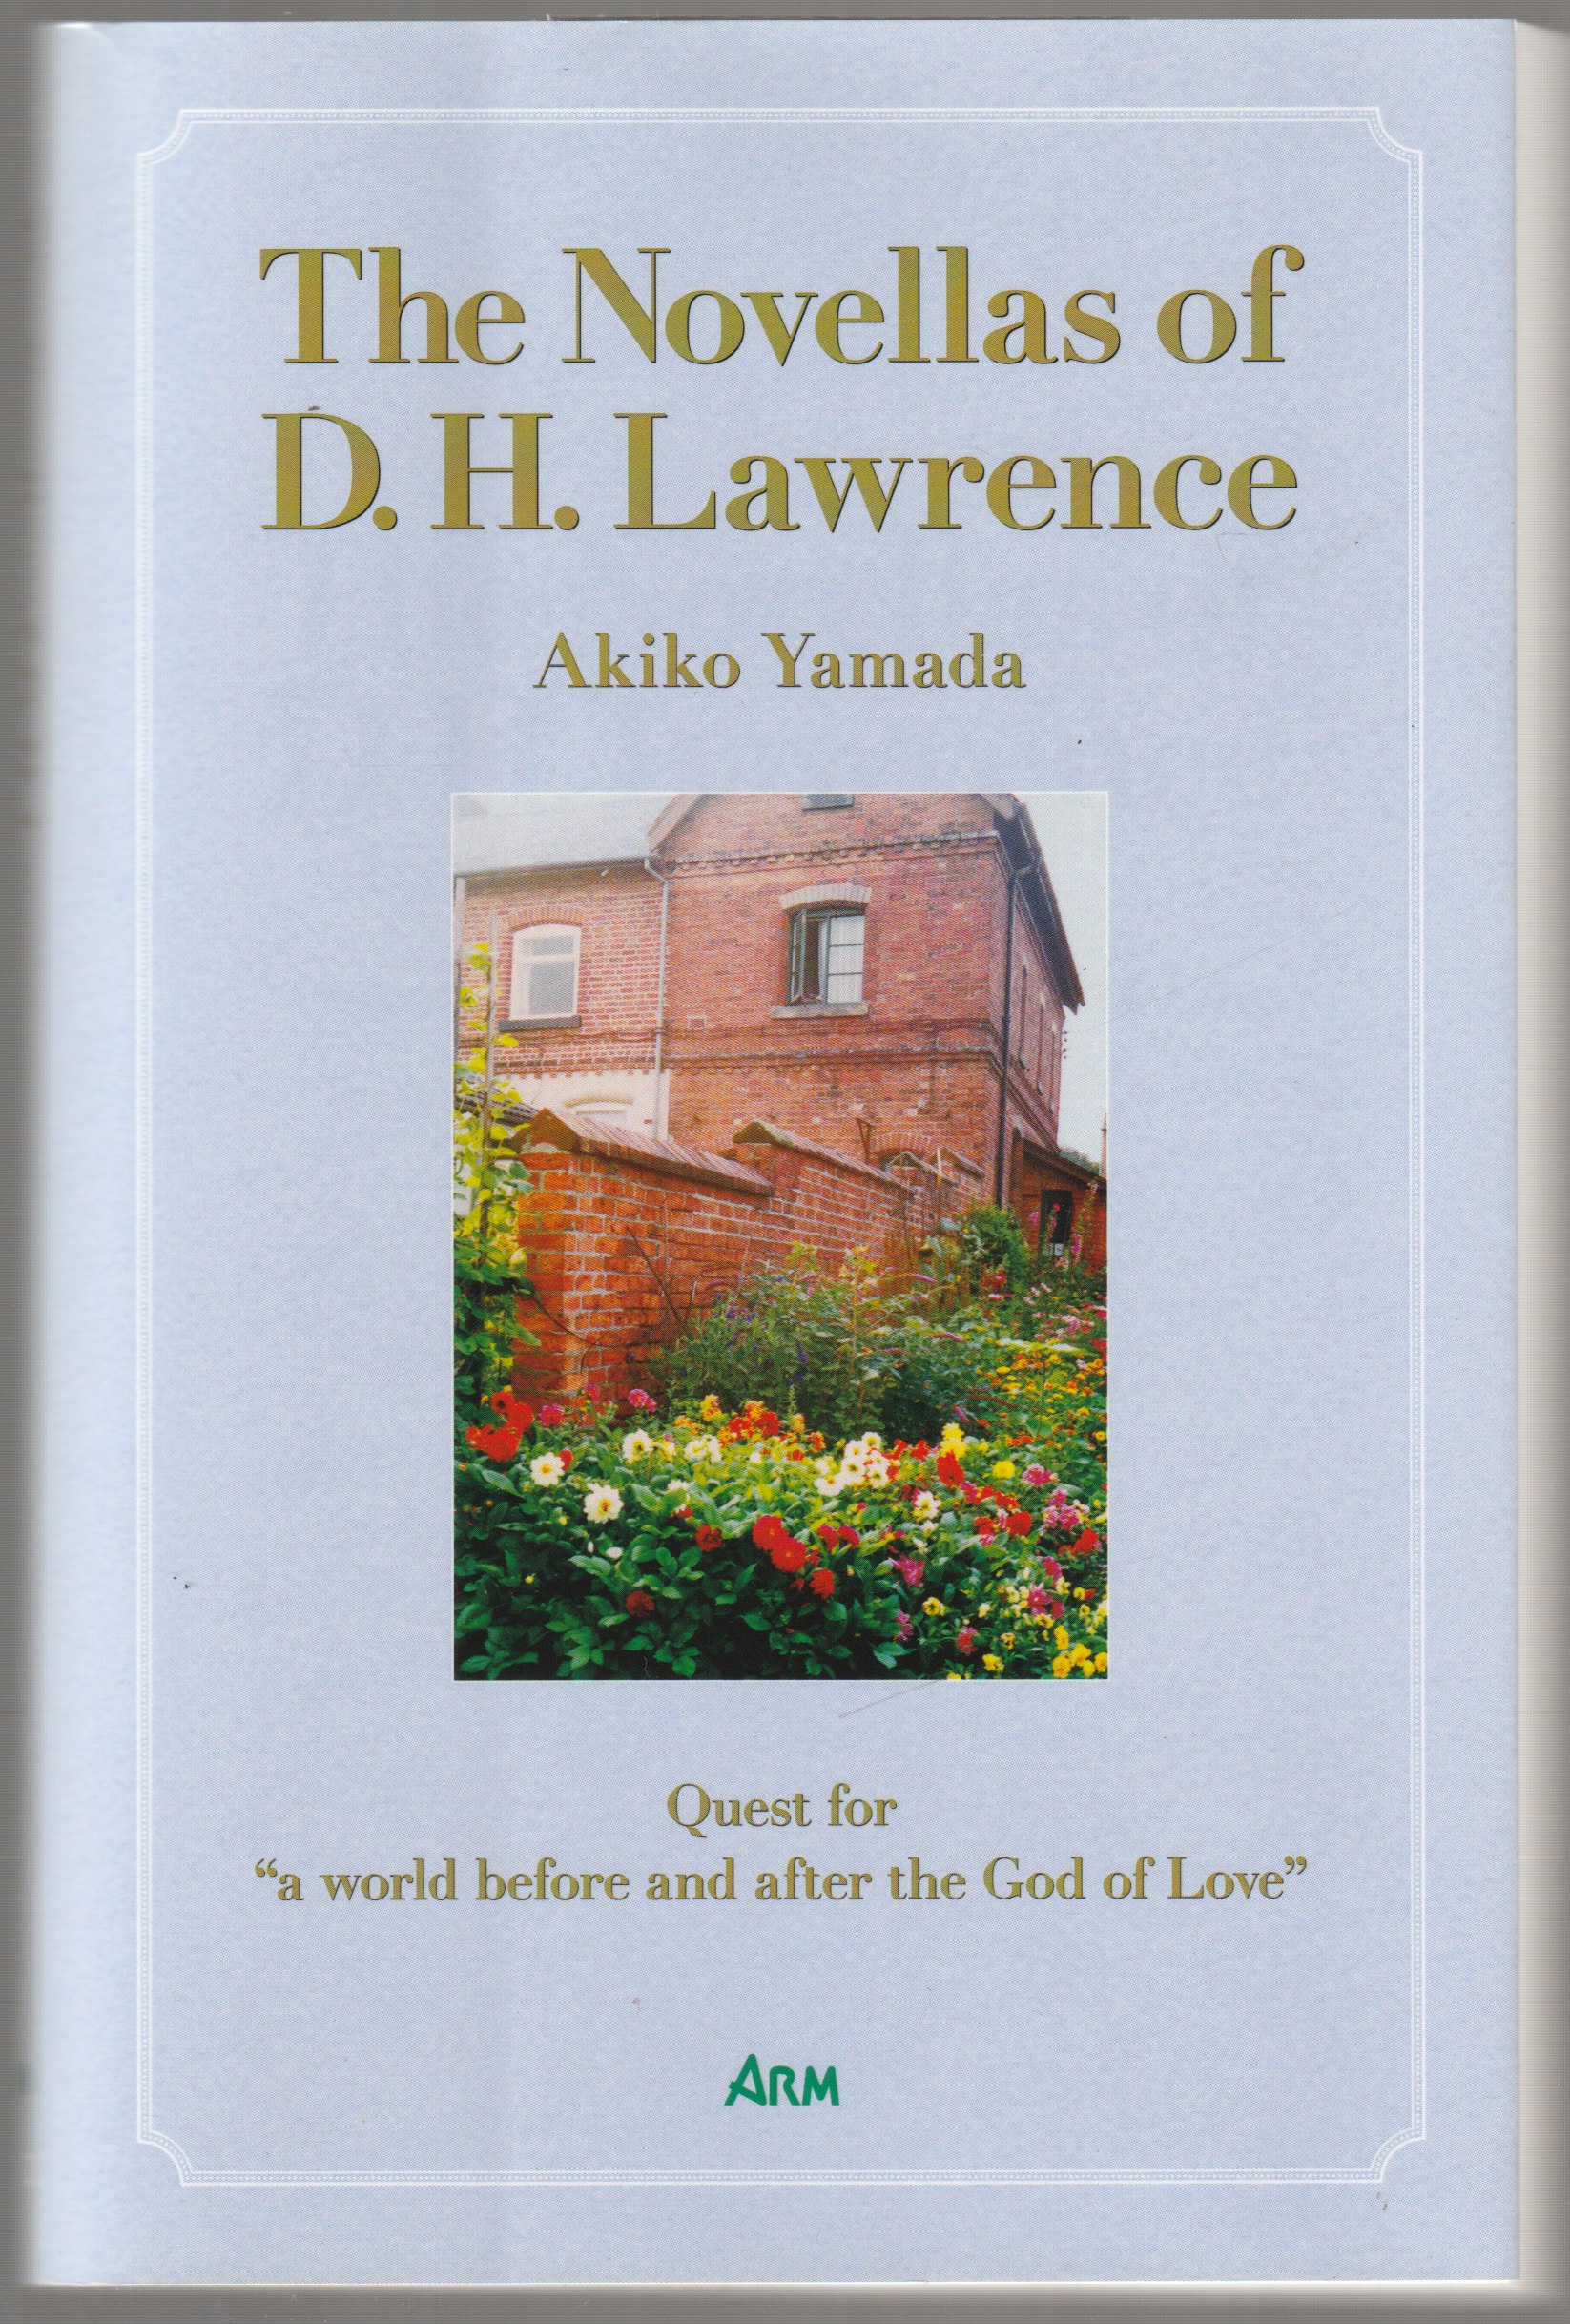 The novellas of D.H. Lawrence : quest for "a world before and after the God of love"